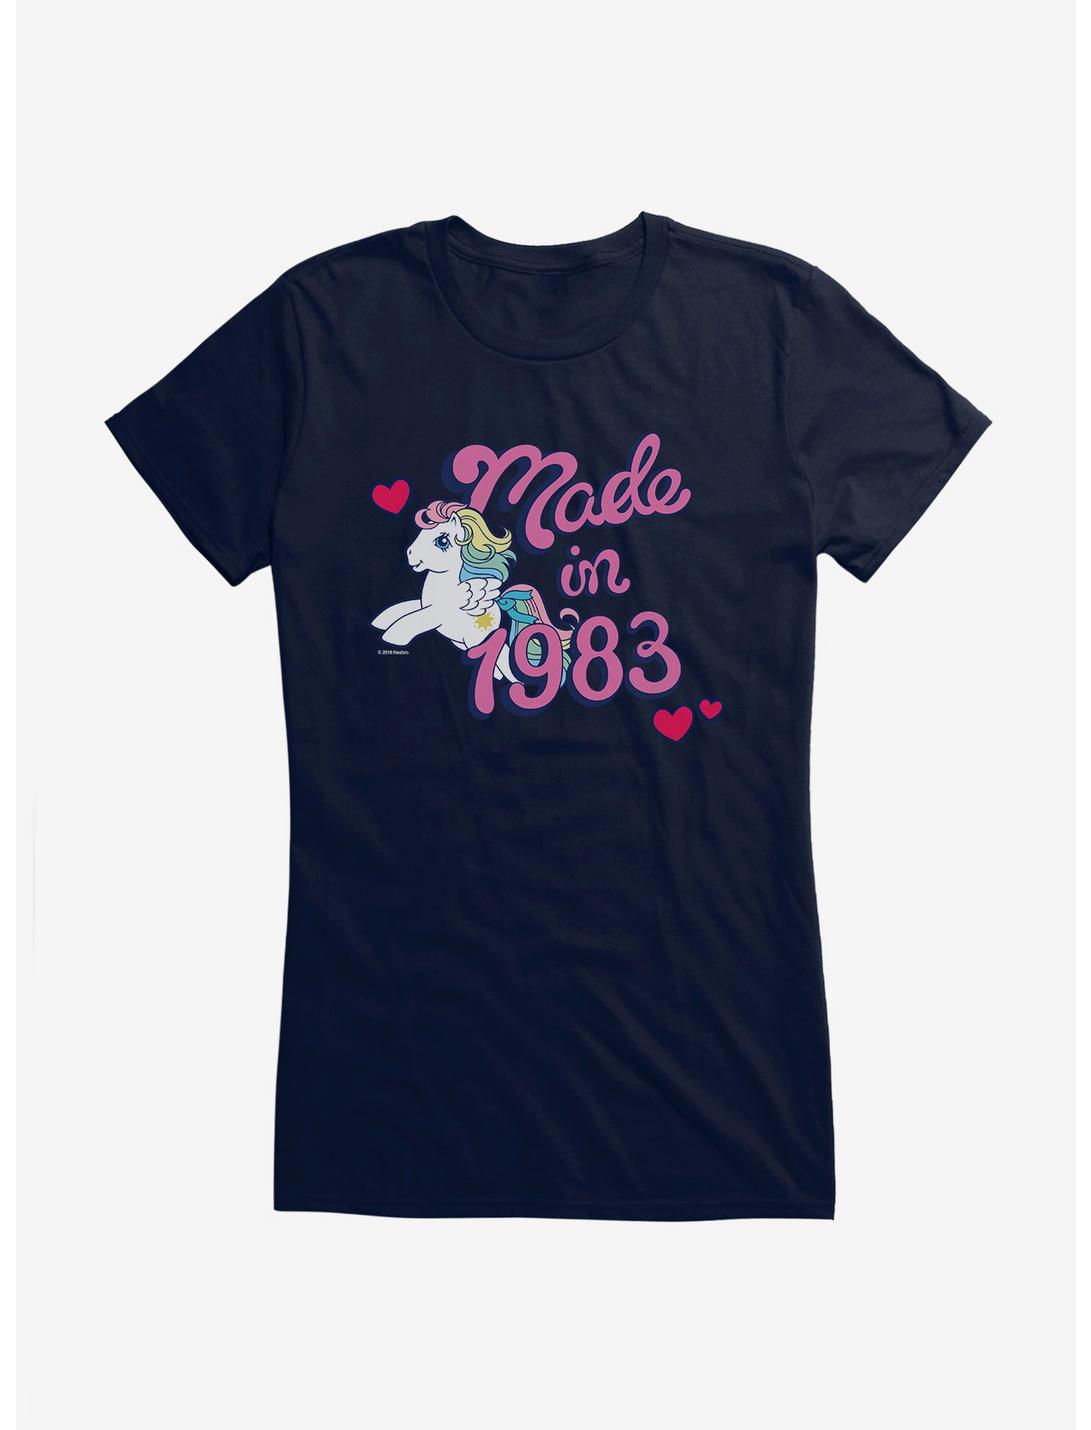 My Little Pony Made In 1983 Girls T-Shirt, NAVY, hi-res